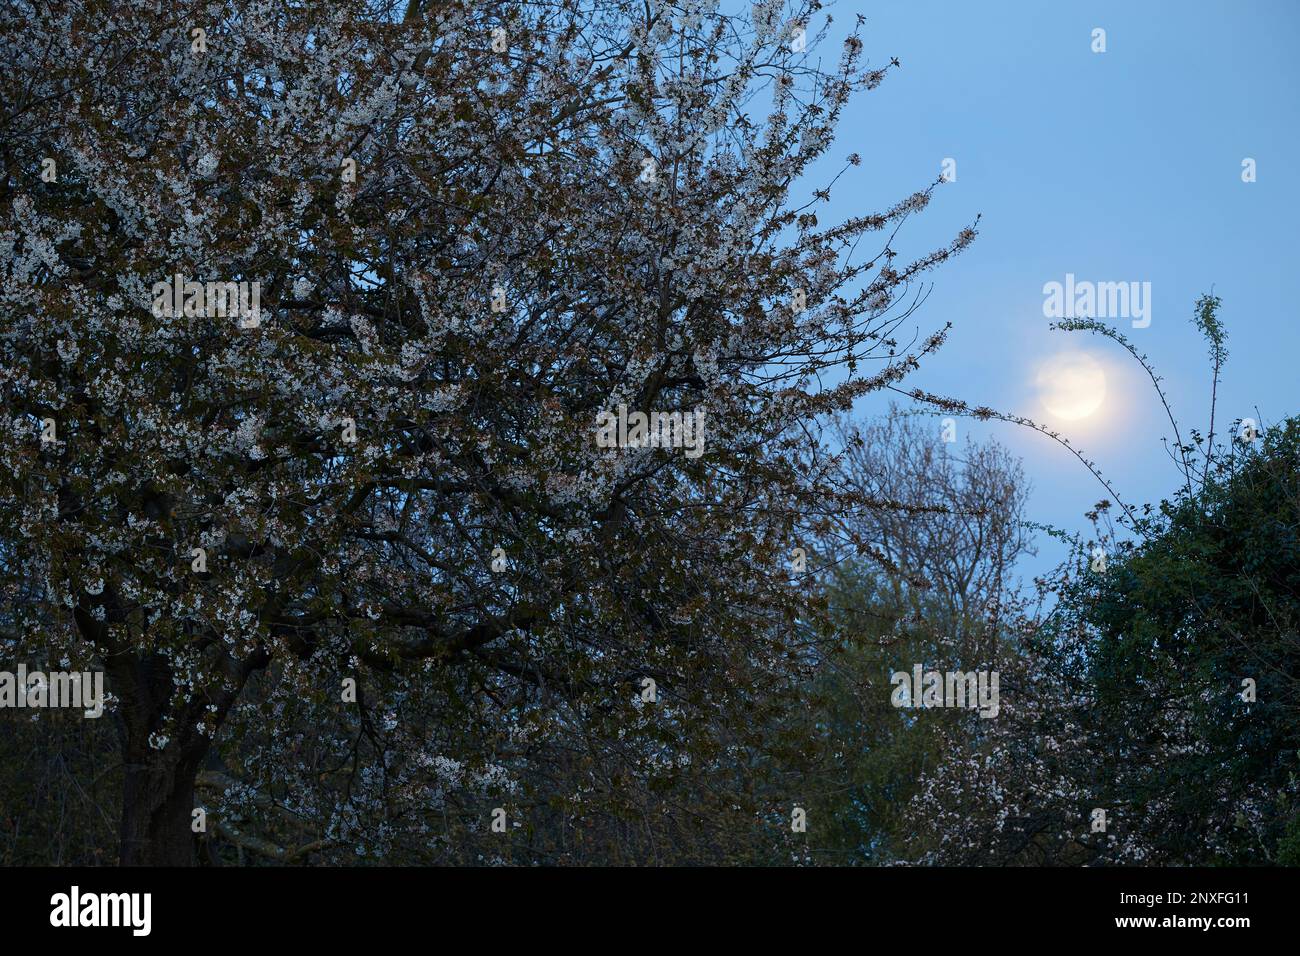 Moon behind tree in full blossom, Telegraph Hill, London Stock Photo